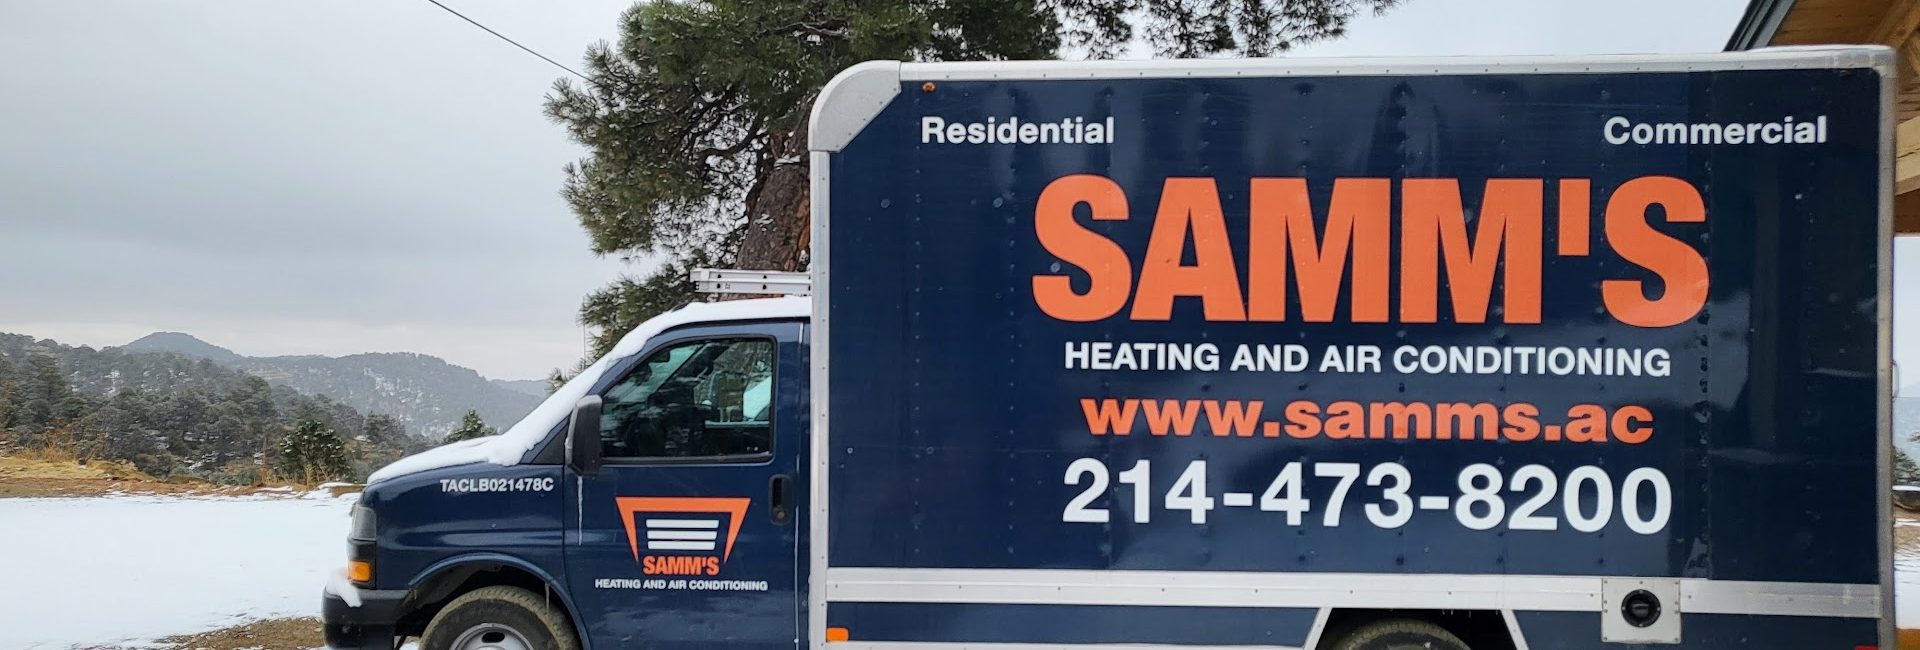 Samm’s Heating and Air Conditioning 2